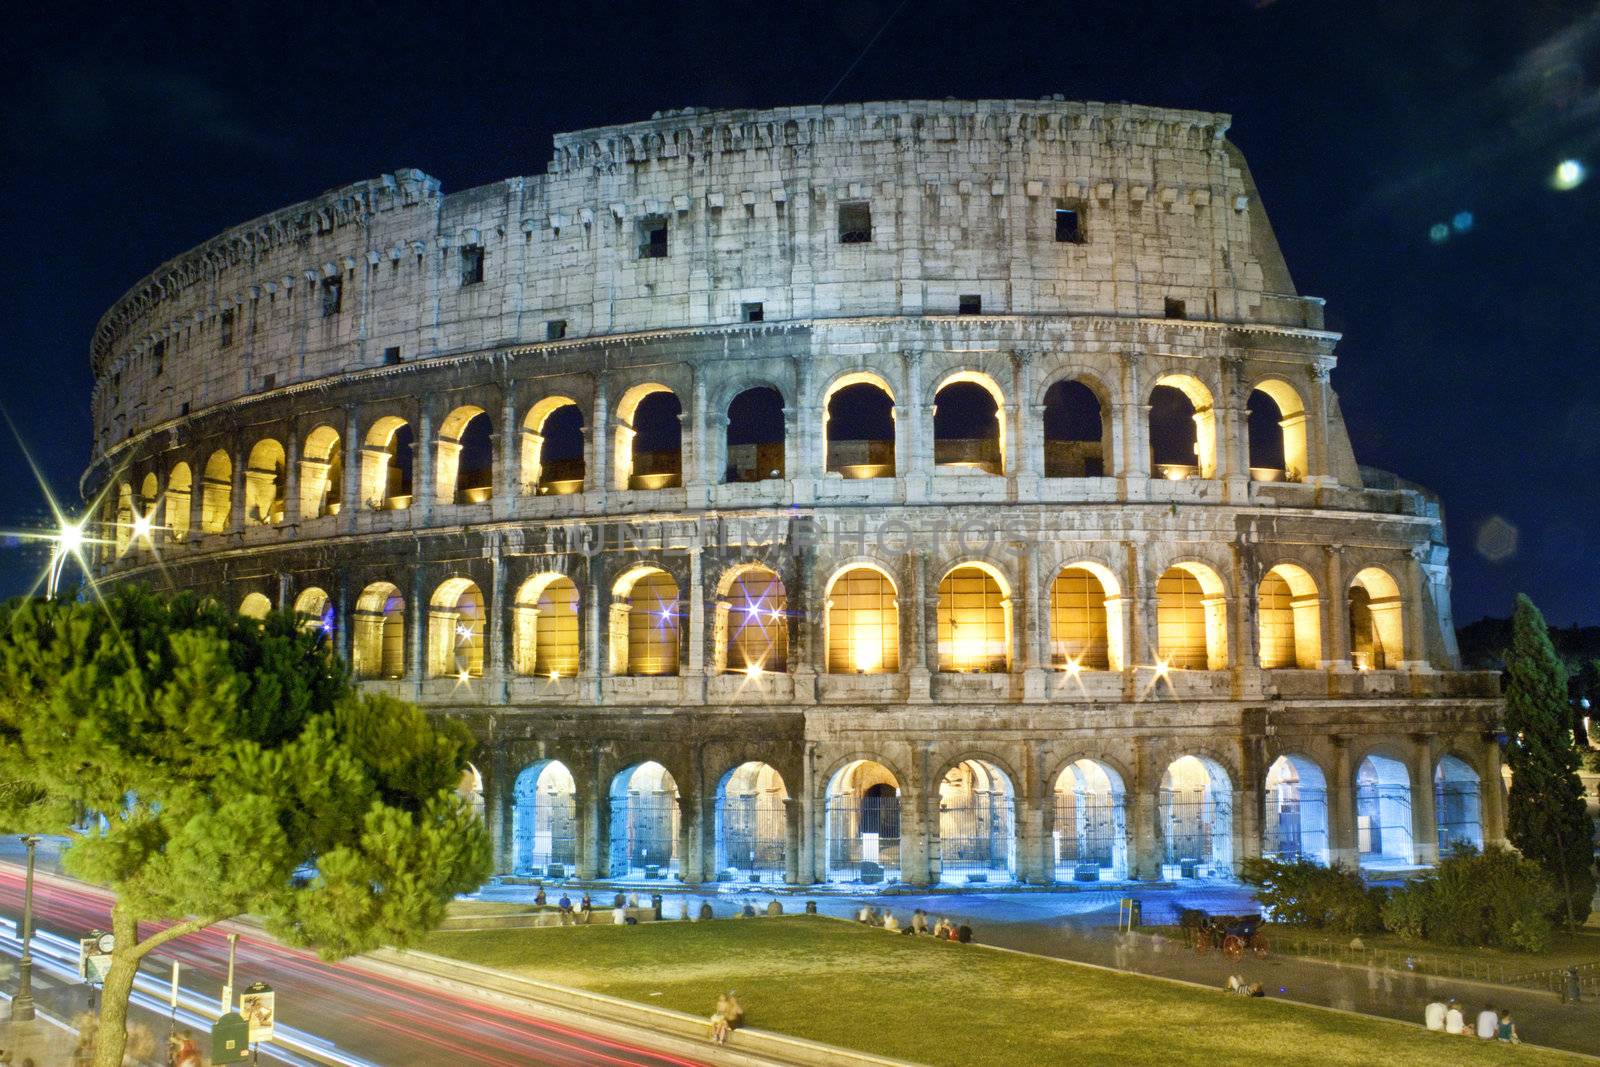 Colosseum by night